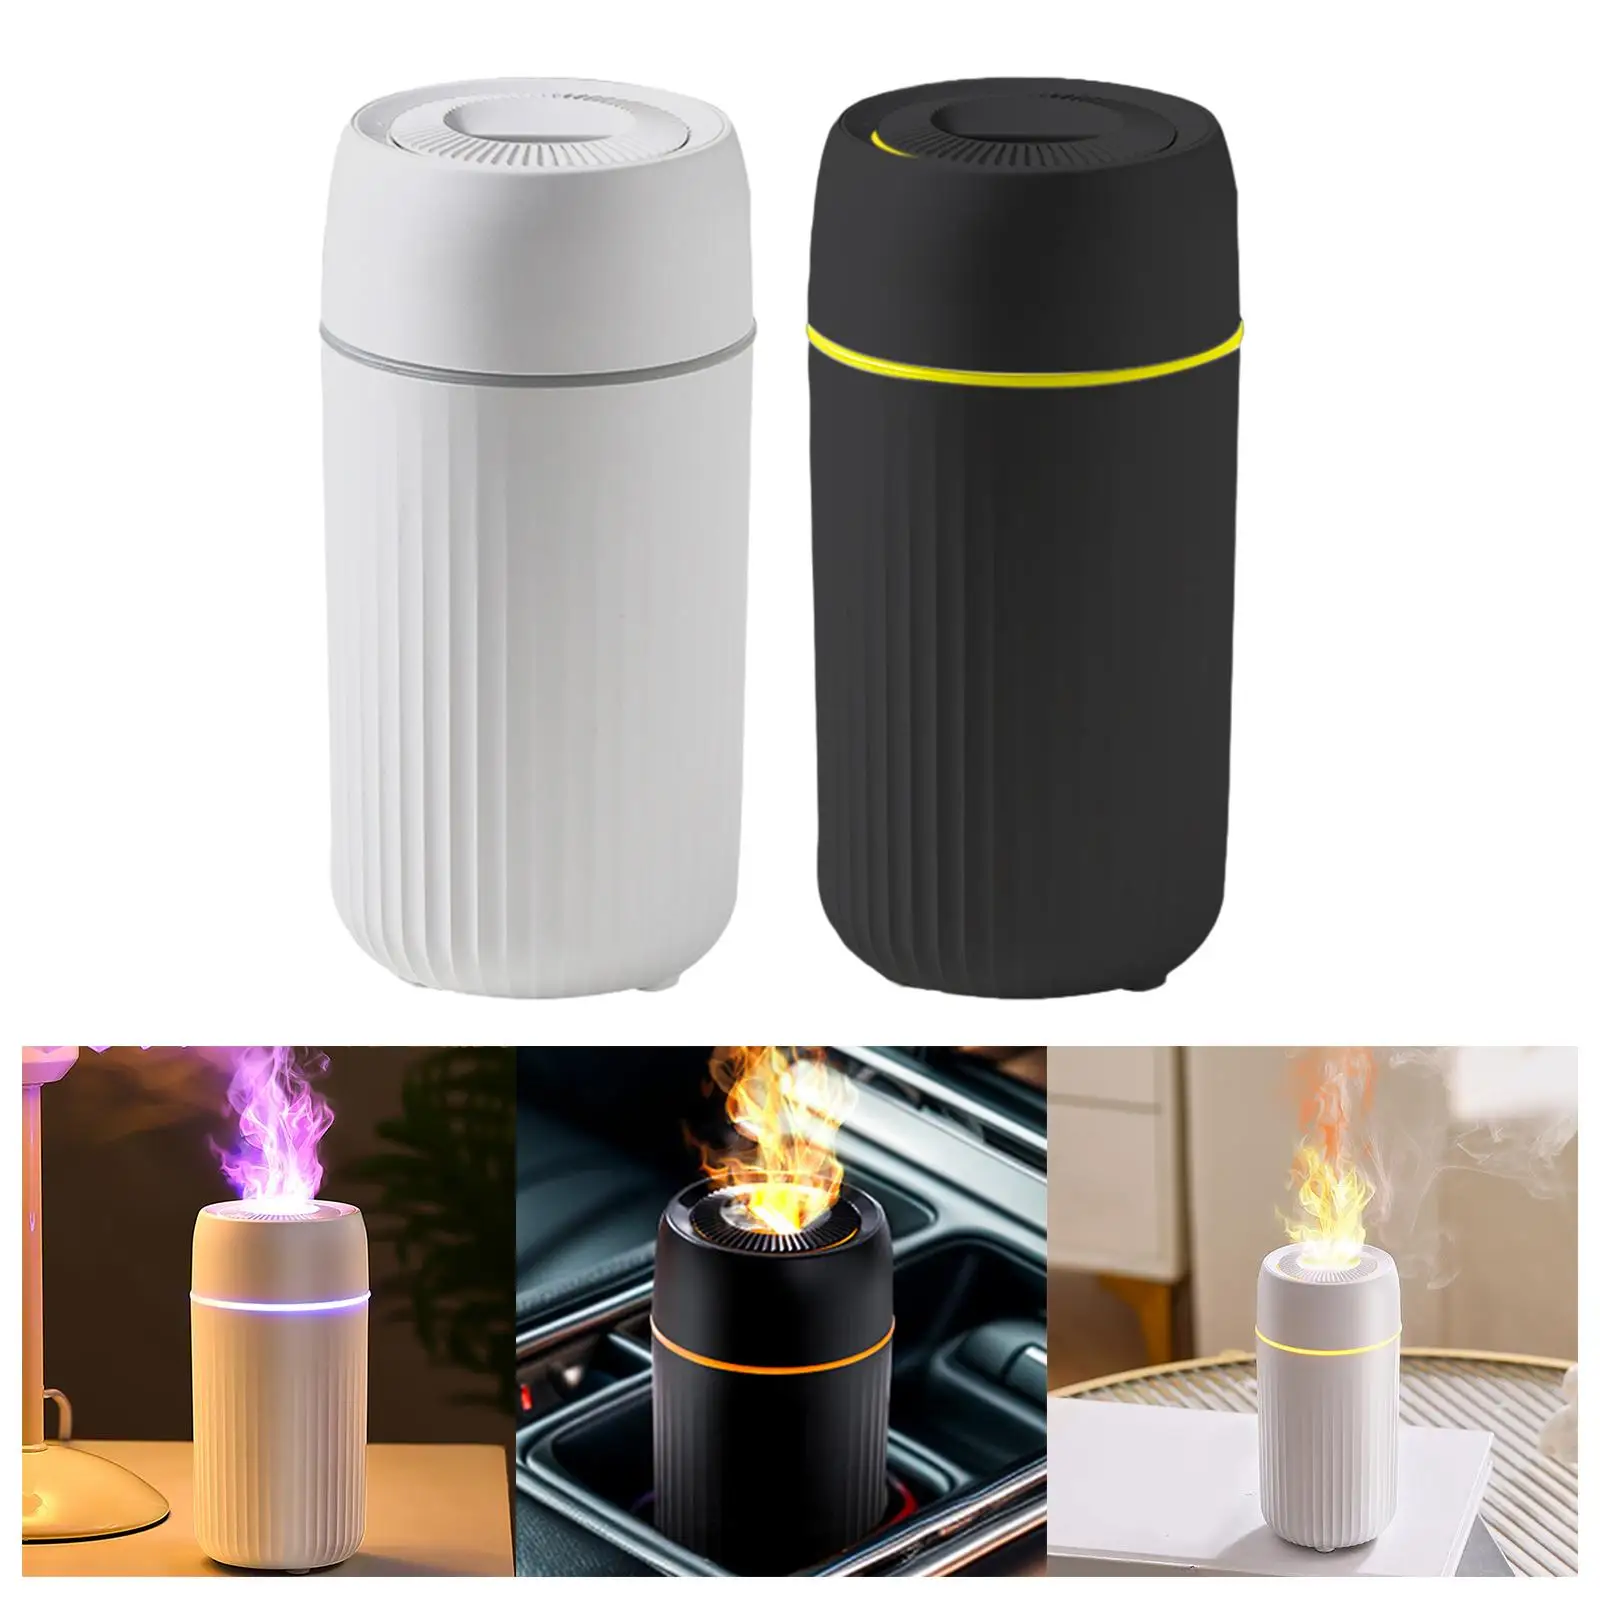 Essential Oil Diffuser Air Diffuser 7 Color Simulation Flame USB Aroma Diffuser Air Humidifier for Yoga Room SPA Car Living Room